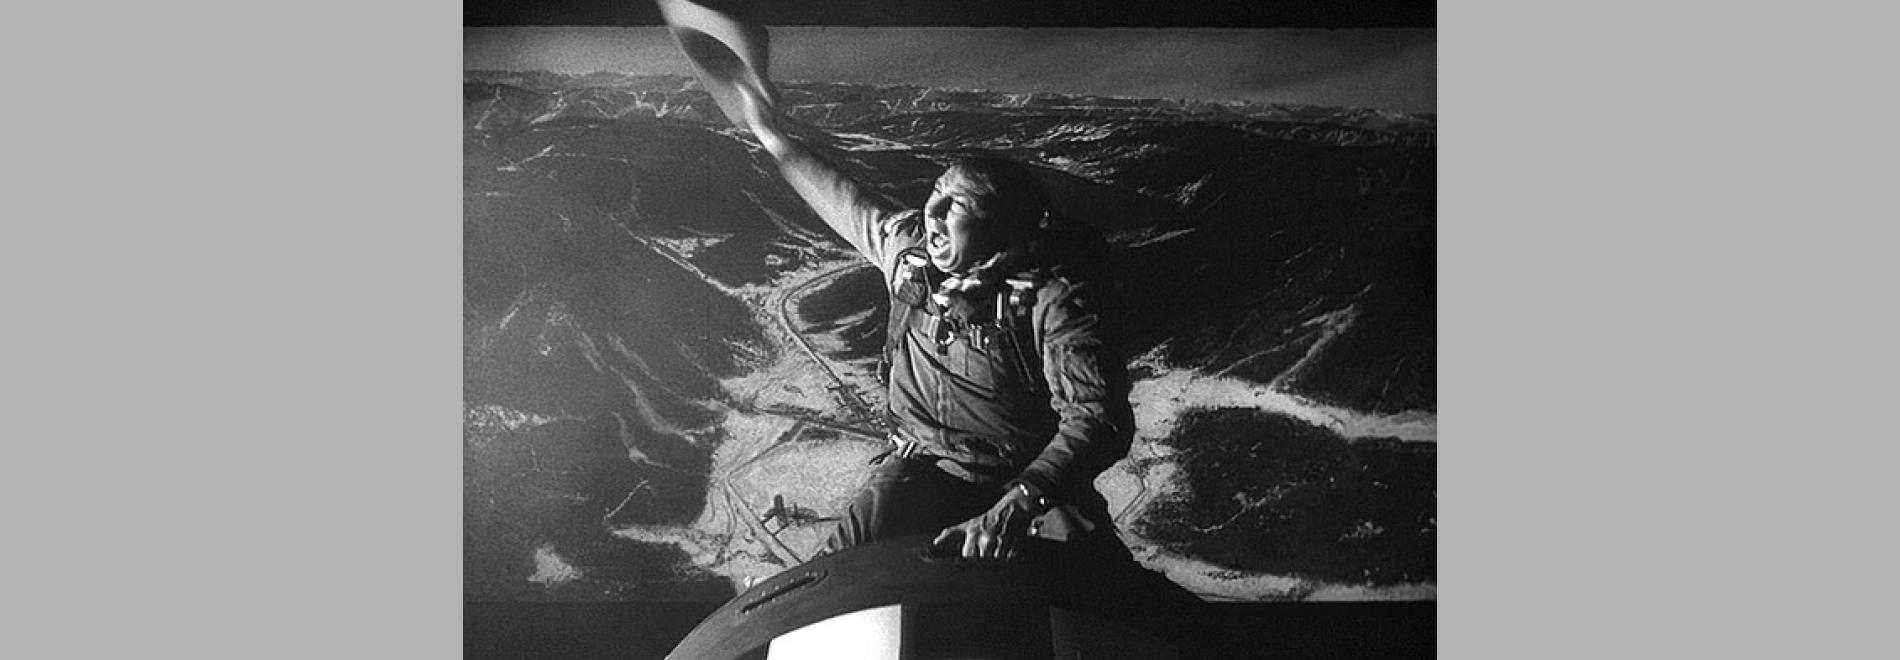 Dr. Strangelove or:How I Learned to Stop Worrying and Love the Bomb (Stanley Kubrick, 1964)